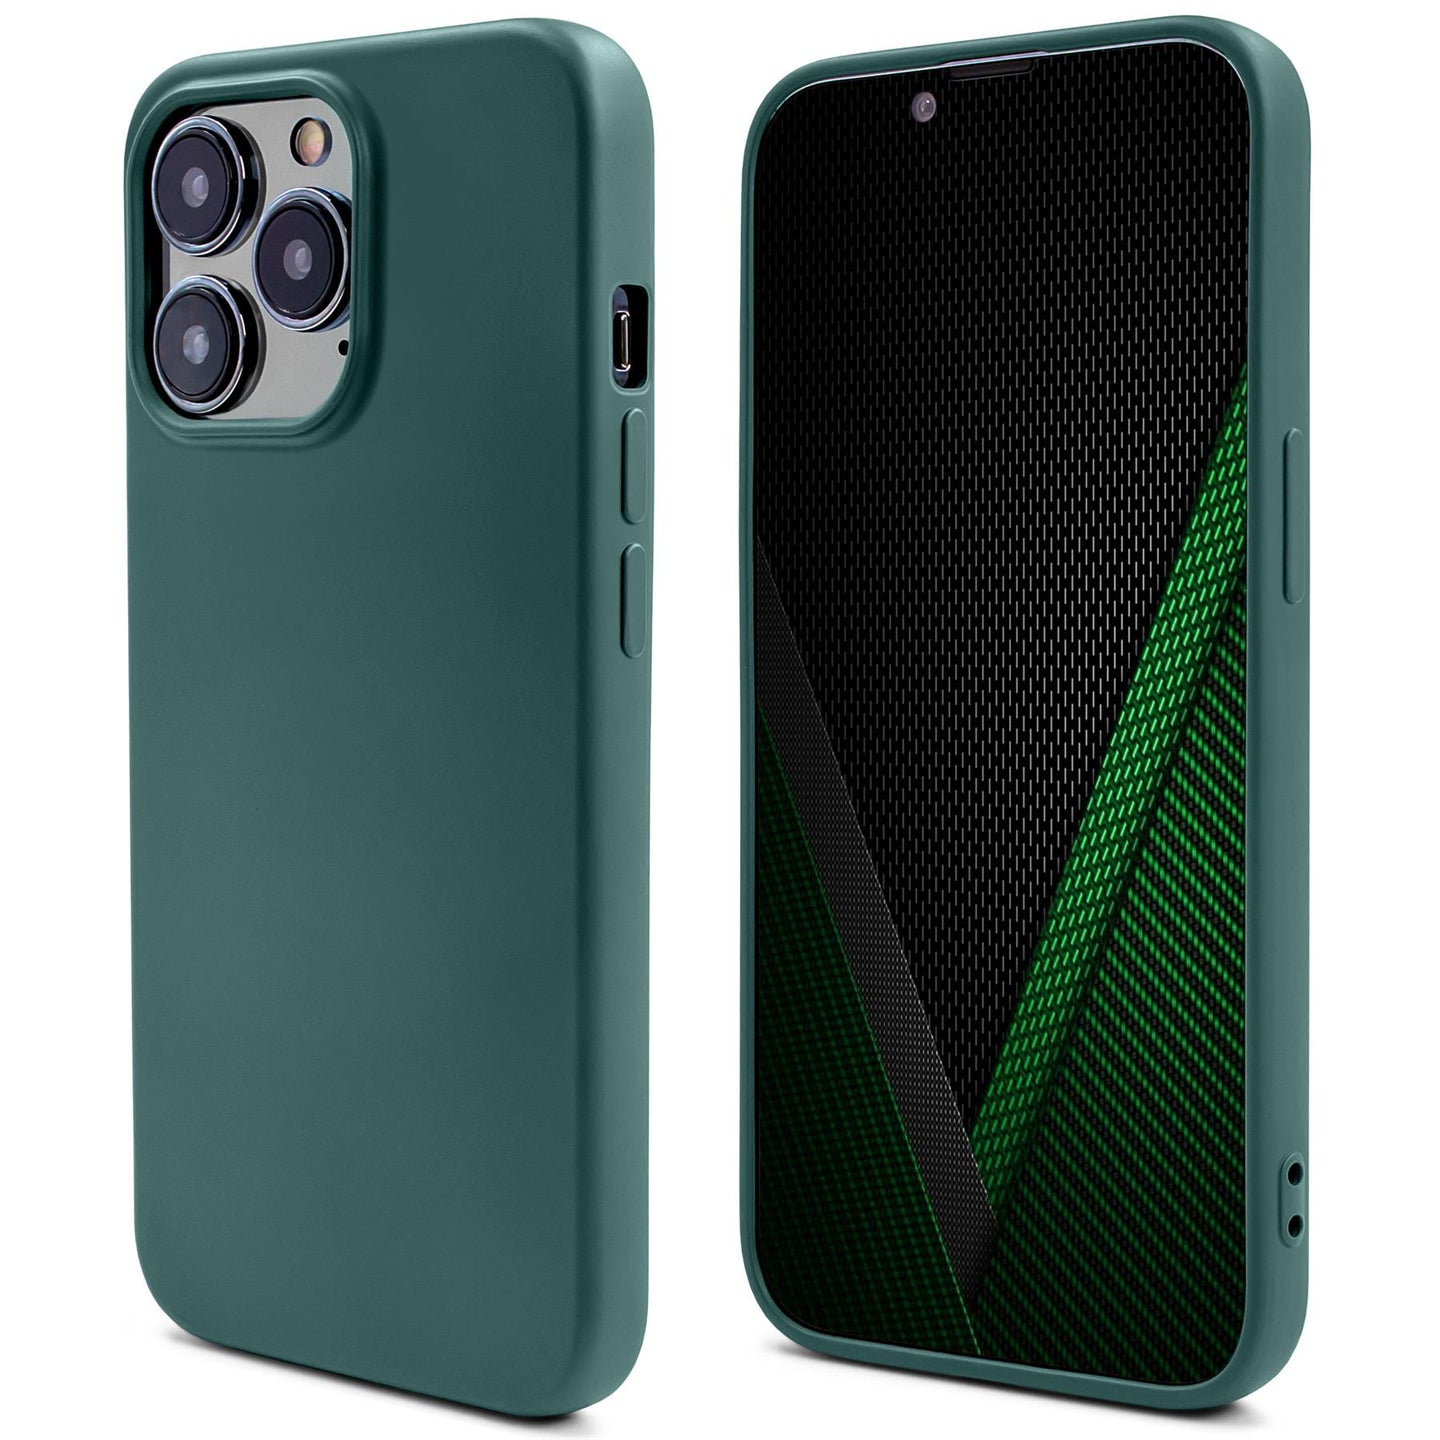 Moozy Lifestyle. Silicone Case for iPhone 14 Pro, Dark Green - Liquid Silicone Lightweight Cover with Matte Finish and Soft Microfiber Lining, Premium Silicone Case